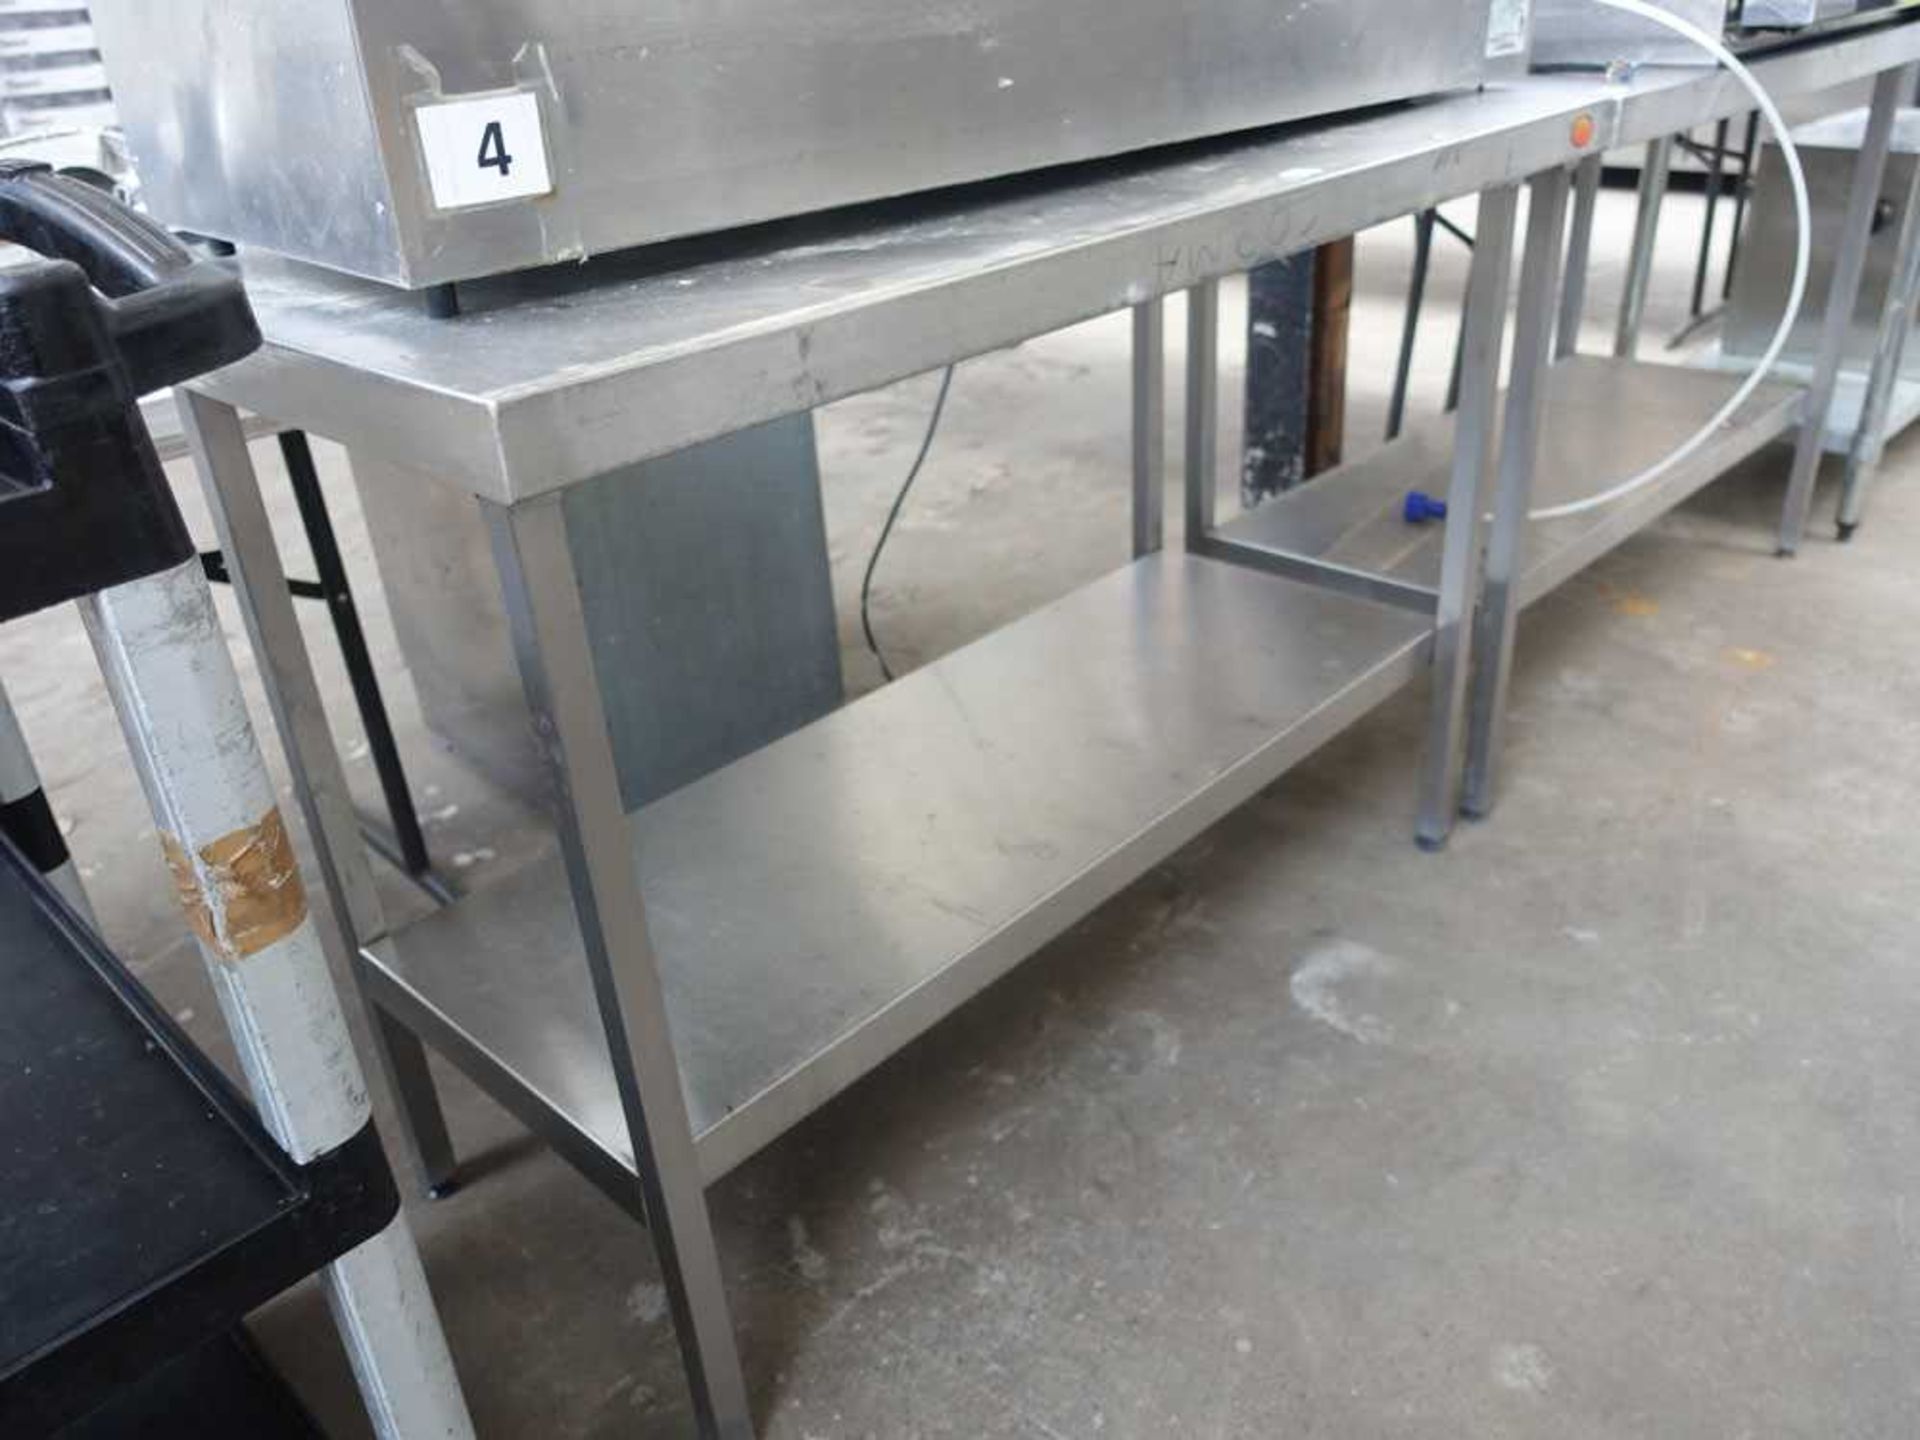 120cm stainless steel preparation table with a shelf under